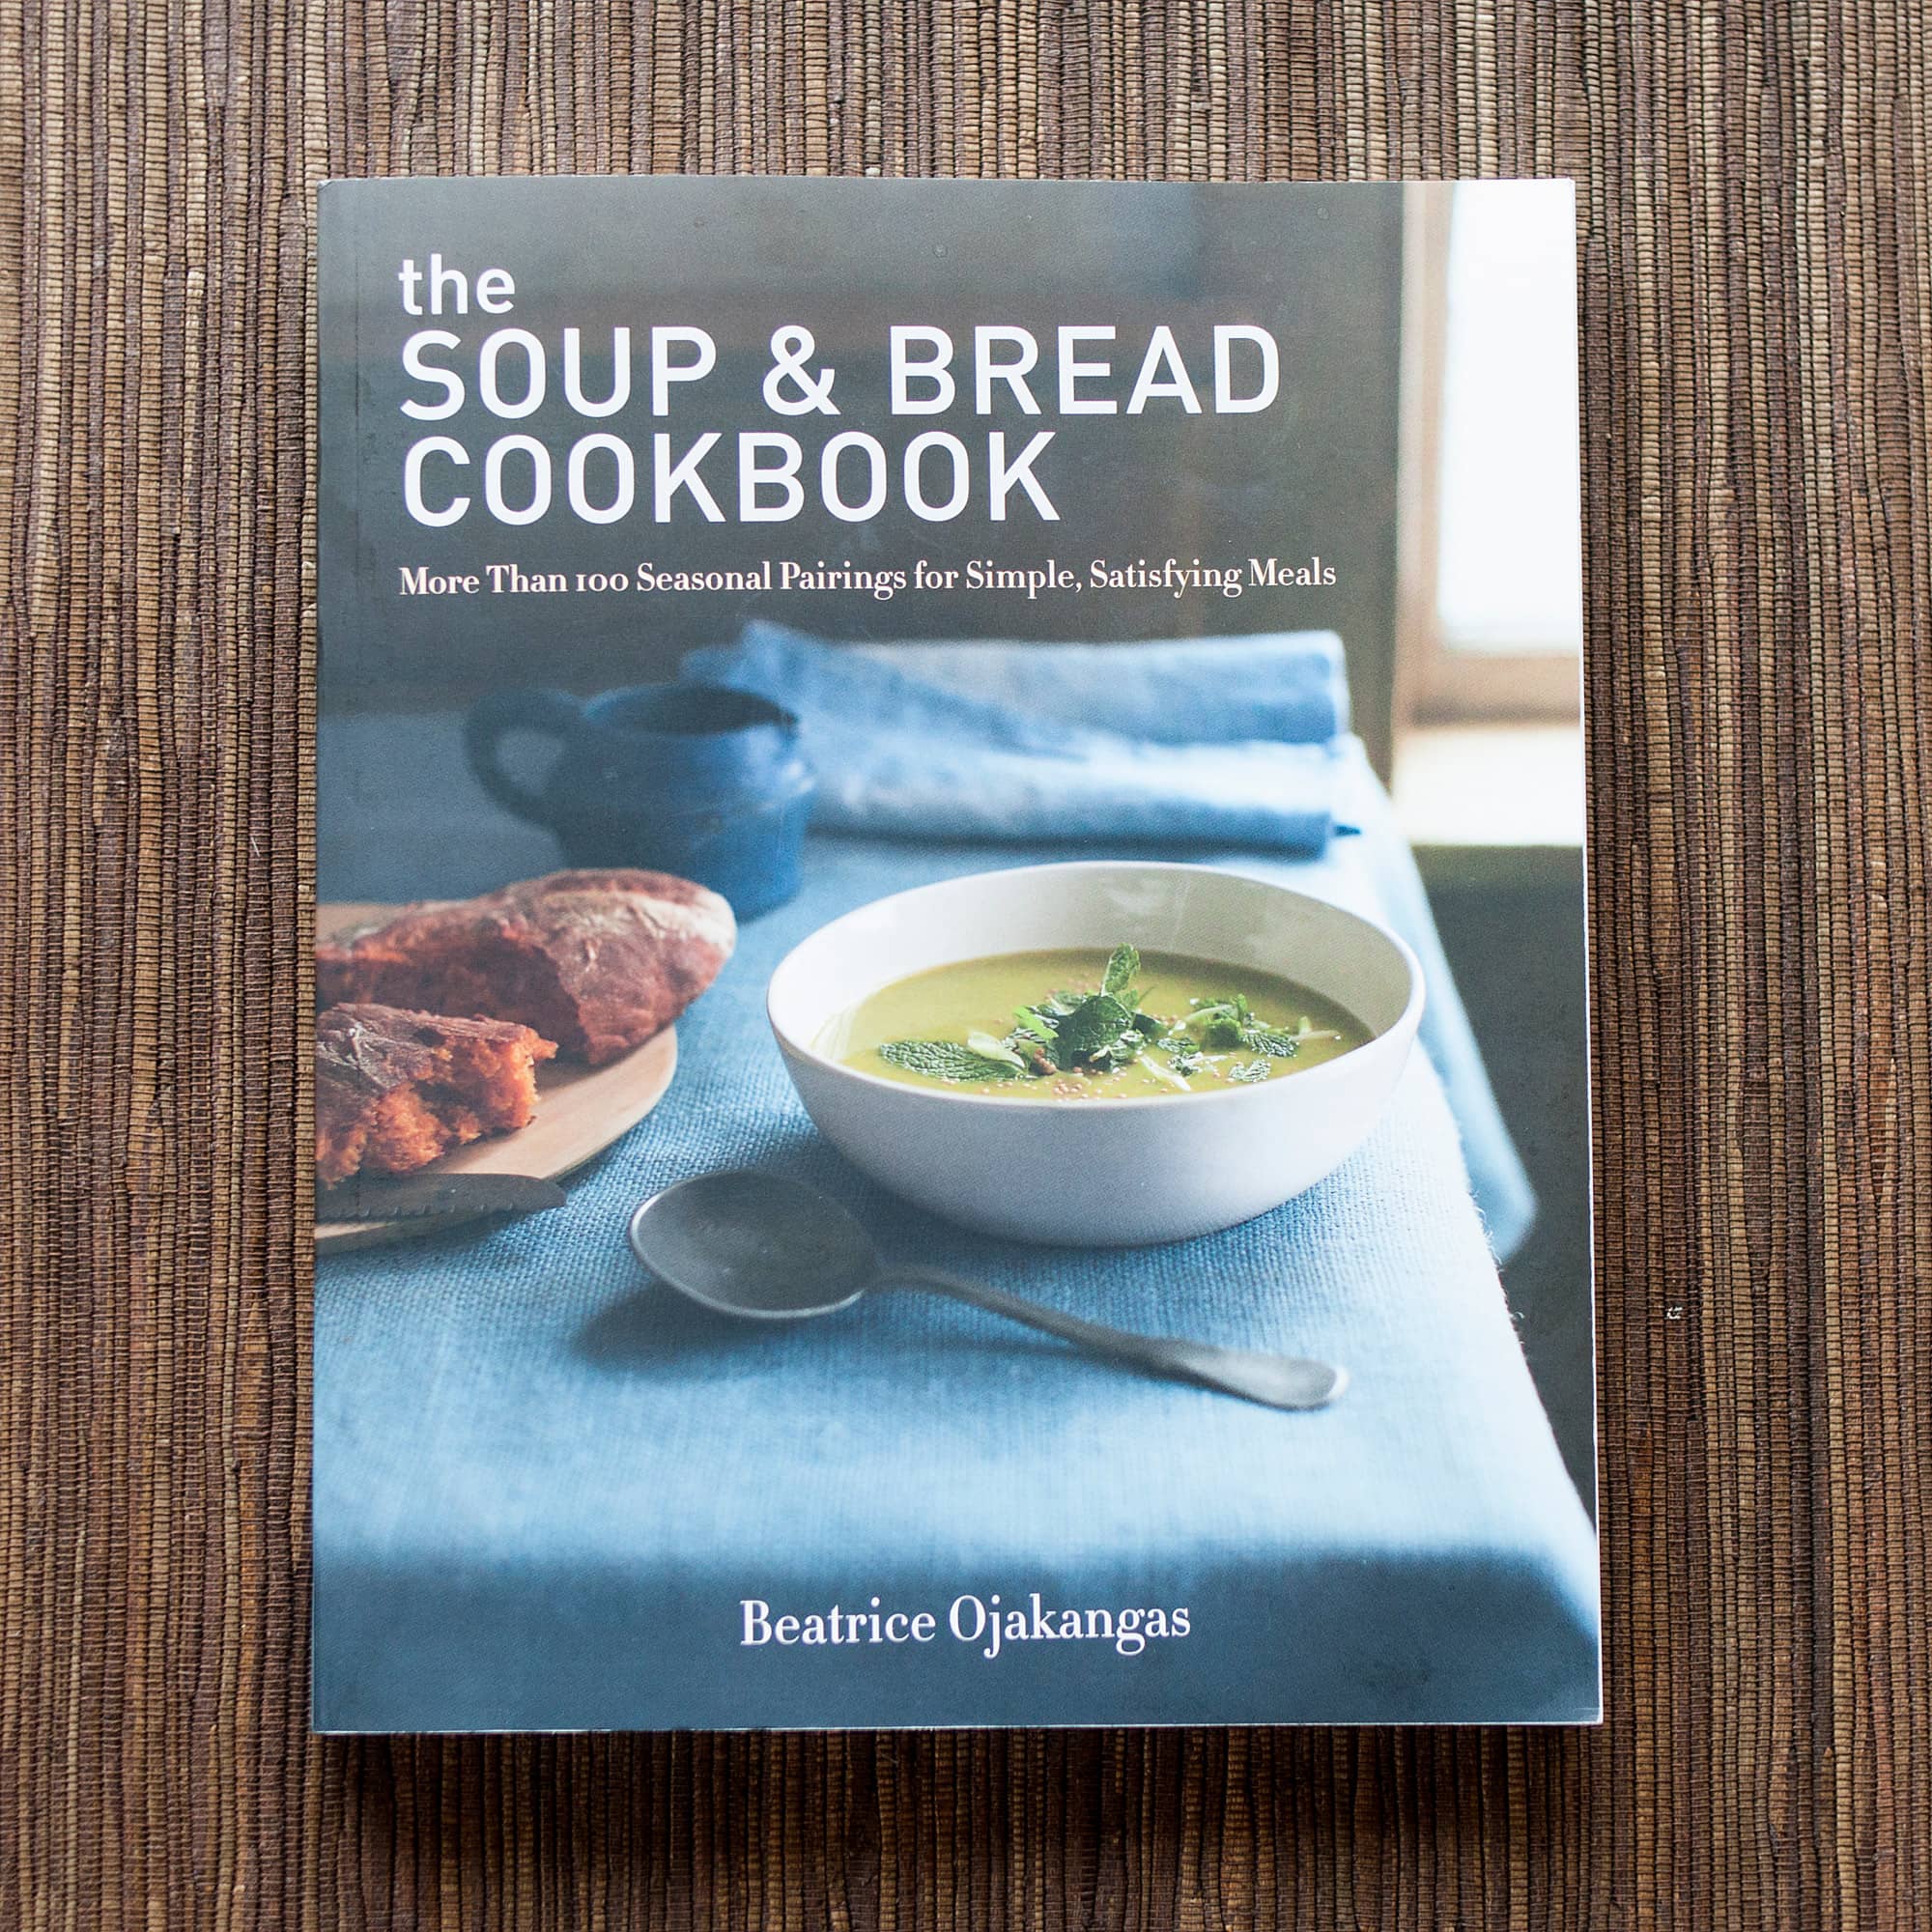 The Soup & Bread Cookbook by Beatrice Ojakangas | Kitchn